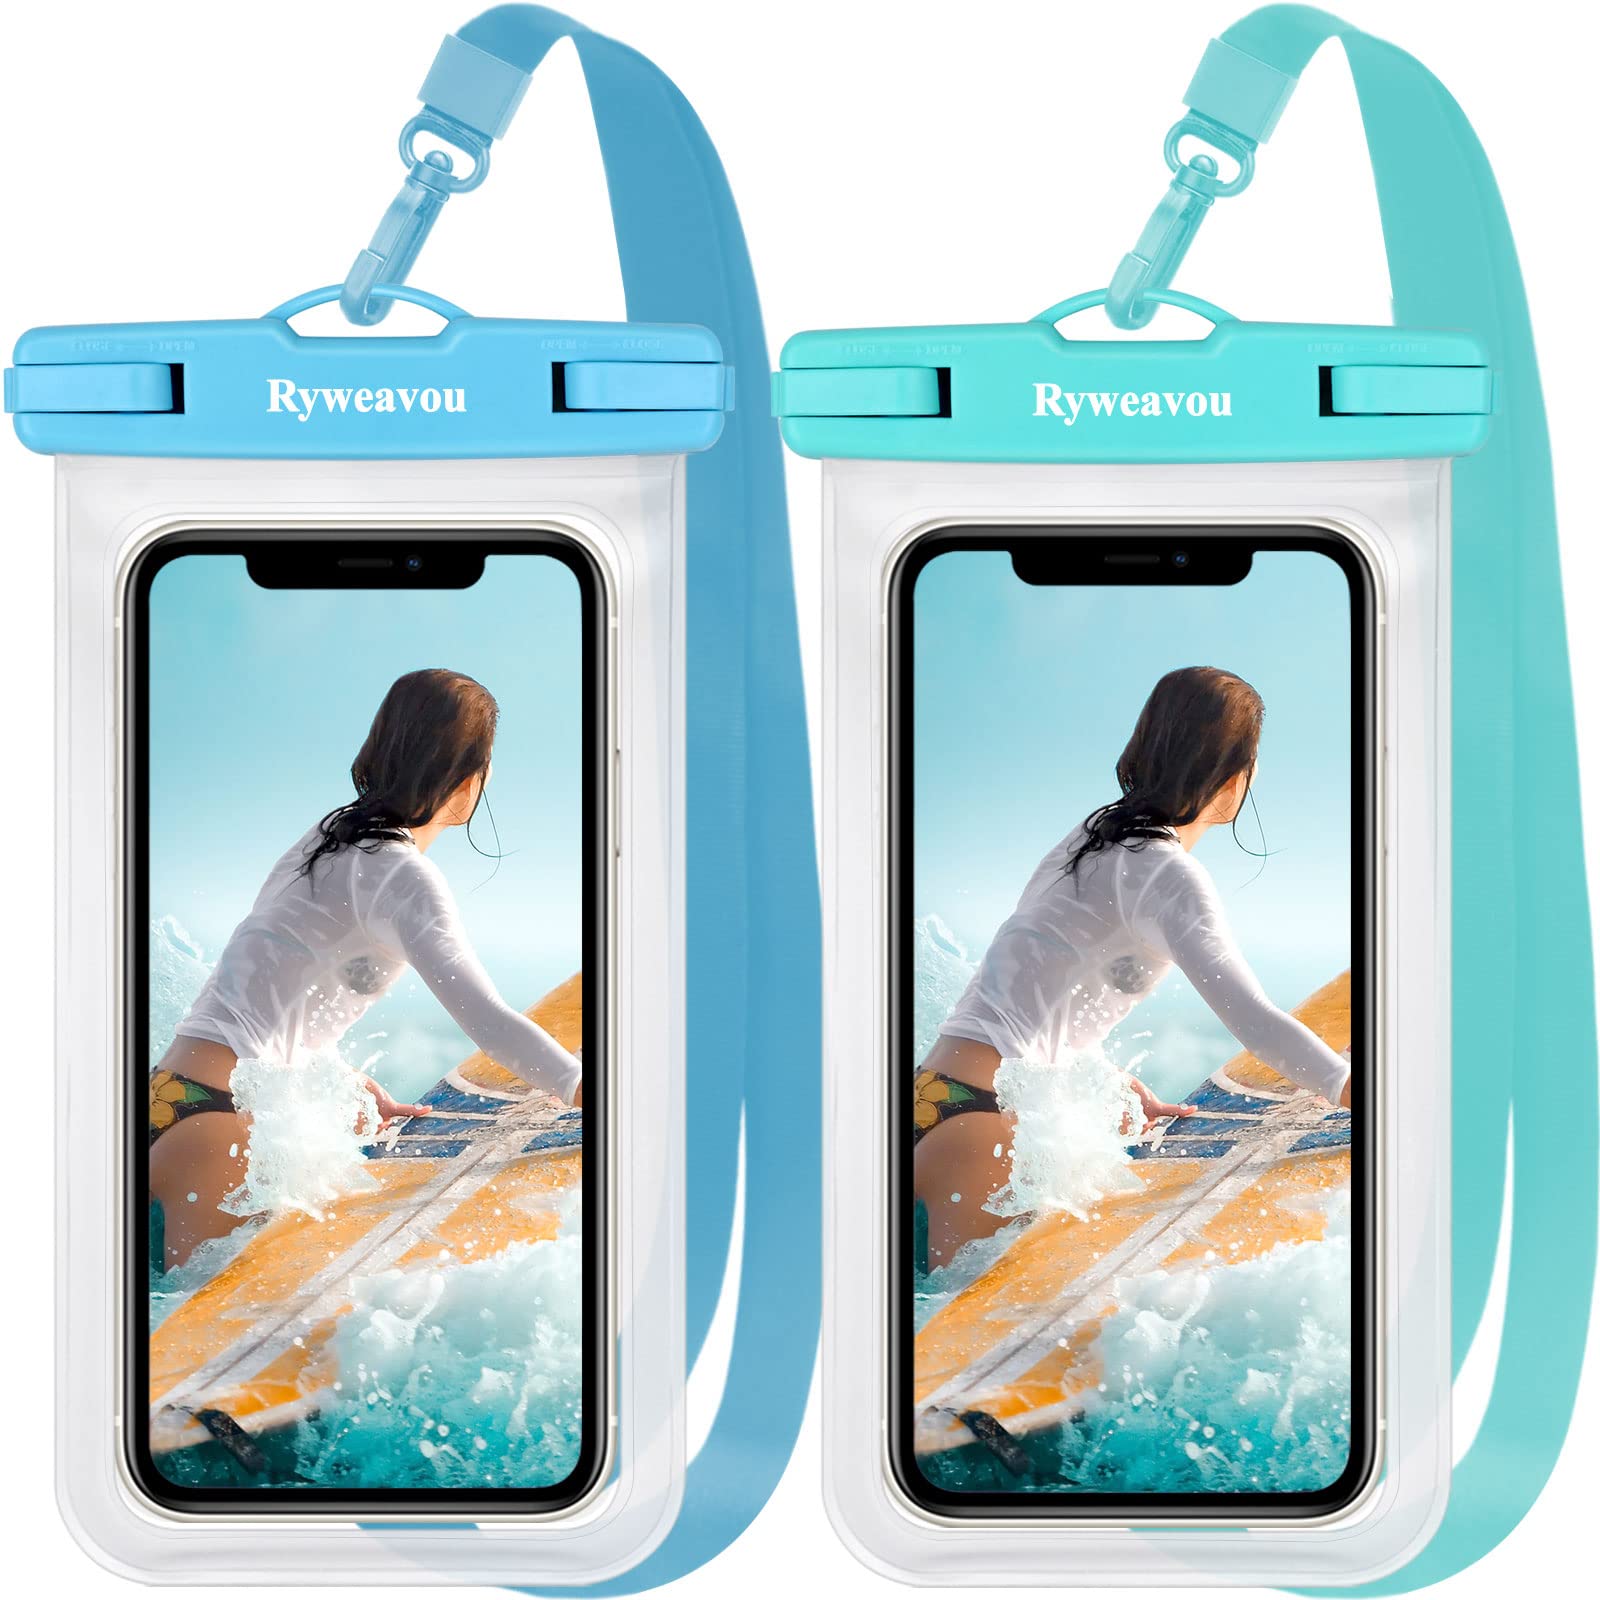 Universal Waterproof Phone Pouch - Ryweavou Waterproof Phone Case for swimming Compatible for IPhone Pro Max Xs Max XR X Samsung Huawei up to 7", IPX8 Waterproof Cellphone Dry Bag-2 Pack